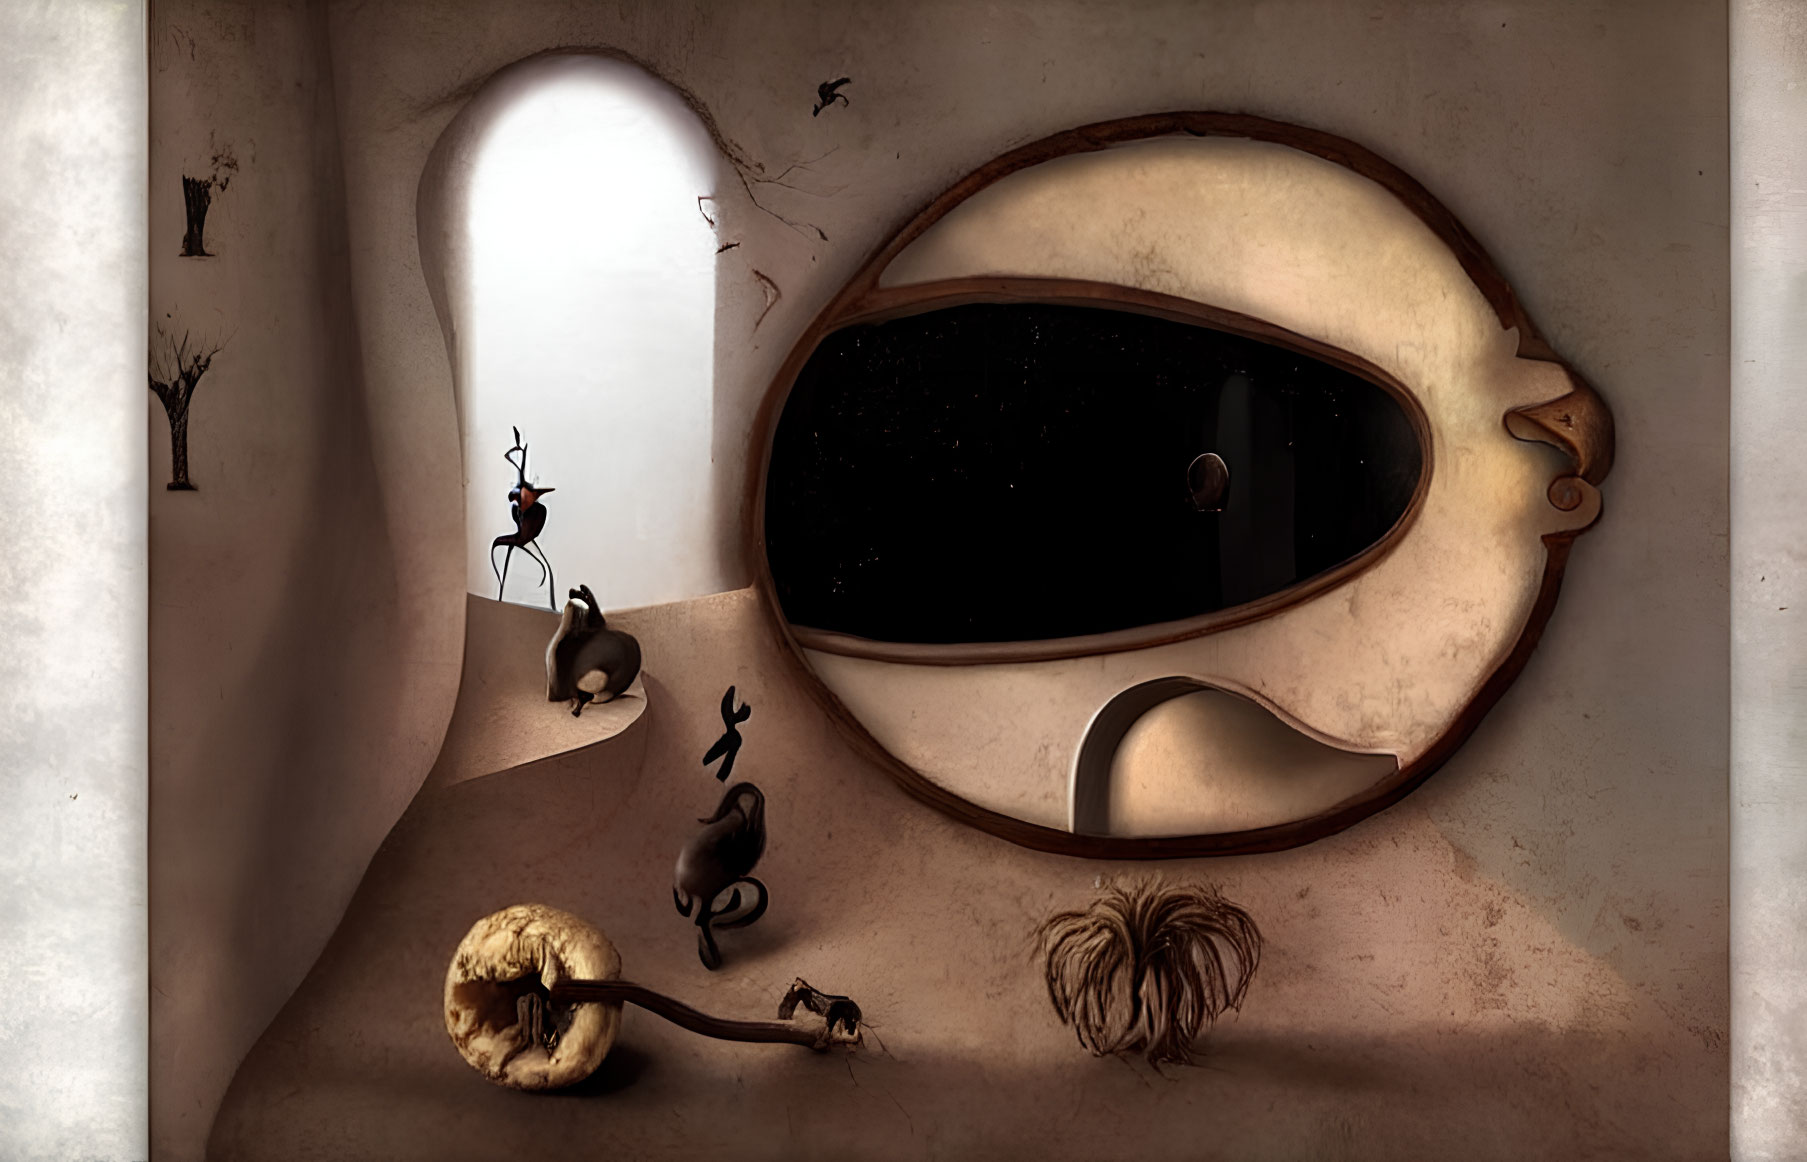 Surreal room with eye-shaped window and starry sky view, silhouetted figure,